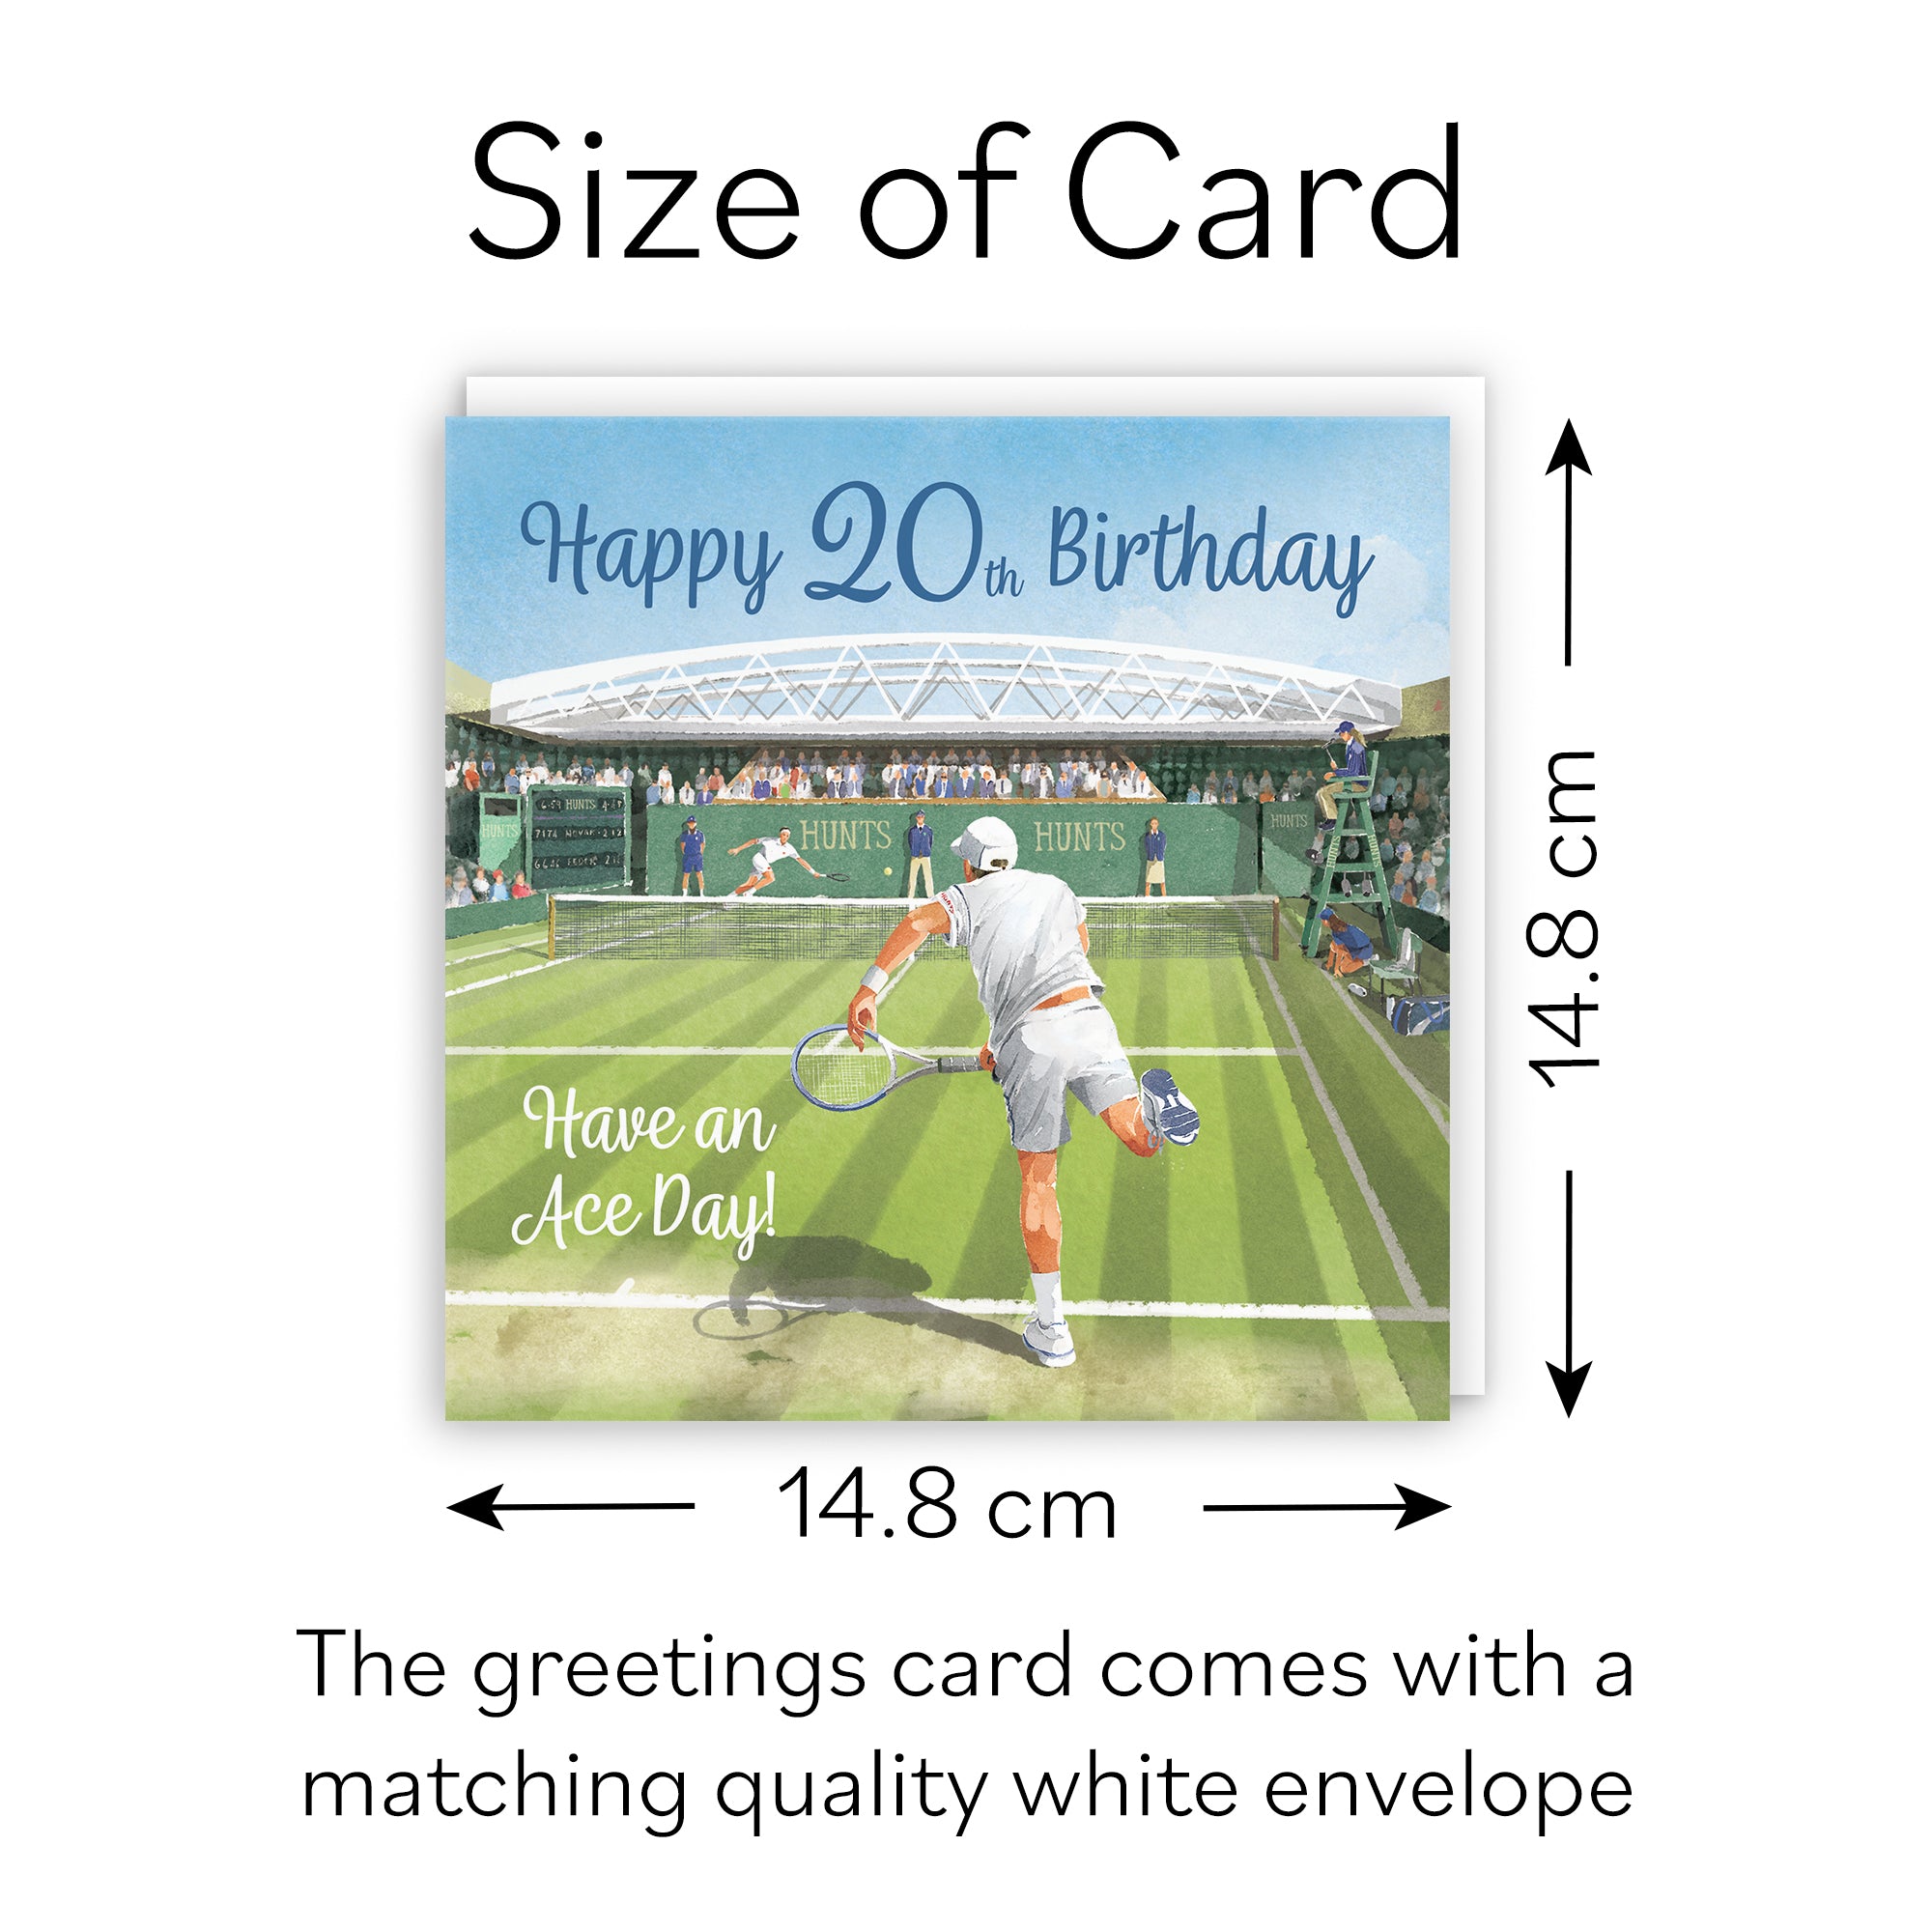 Tennis 20th Birthday Card For Him Milo's Gallery